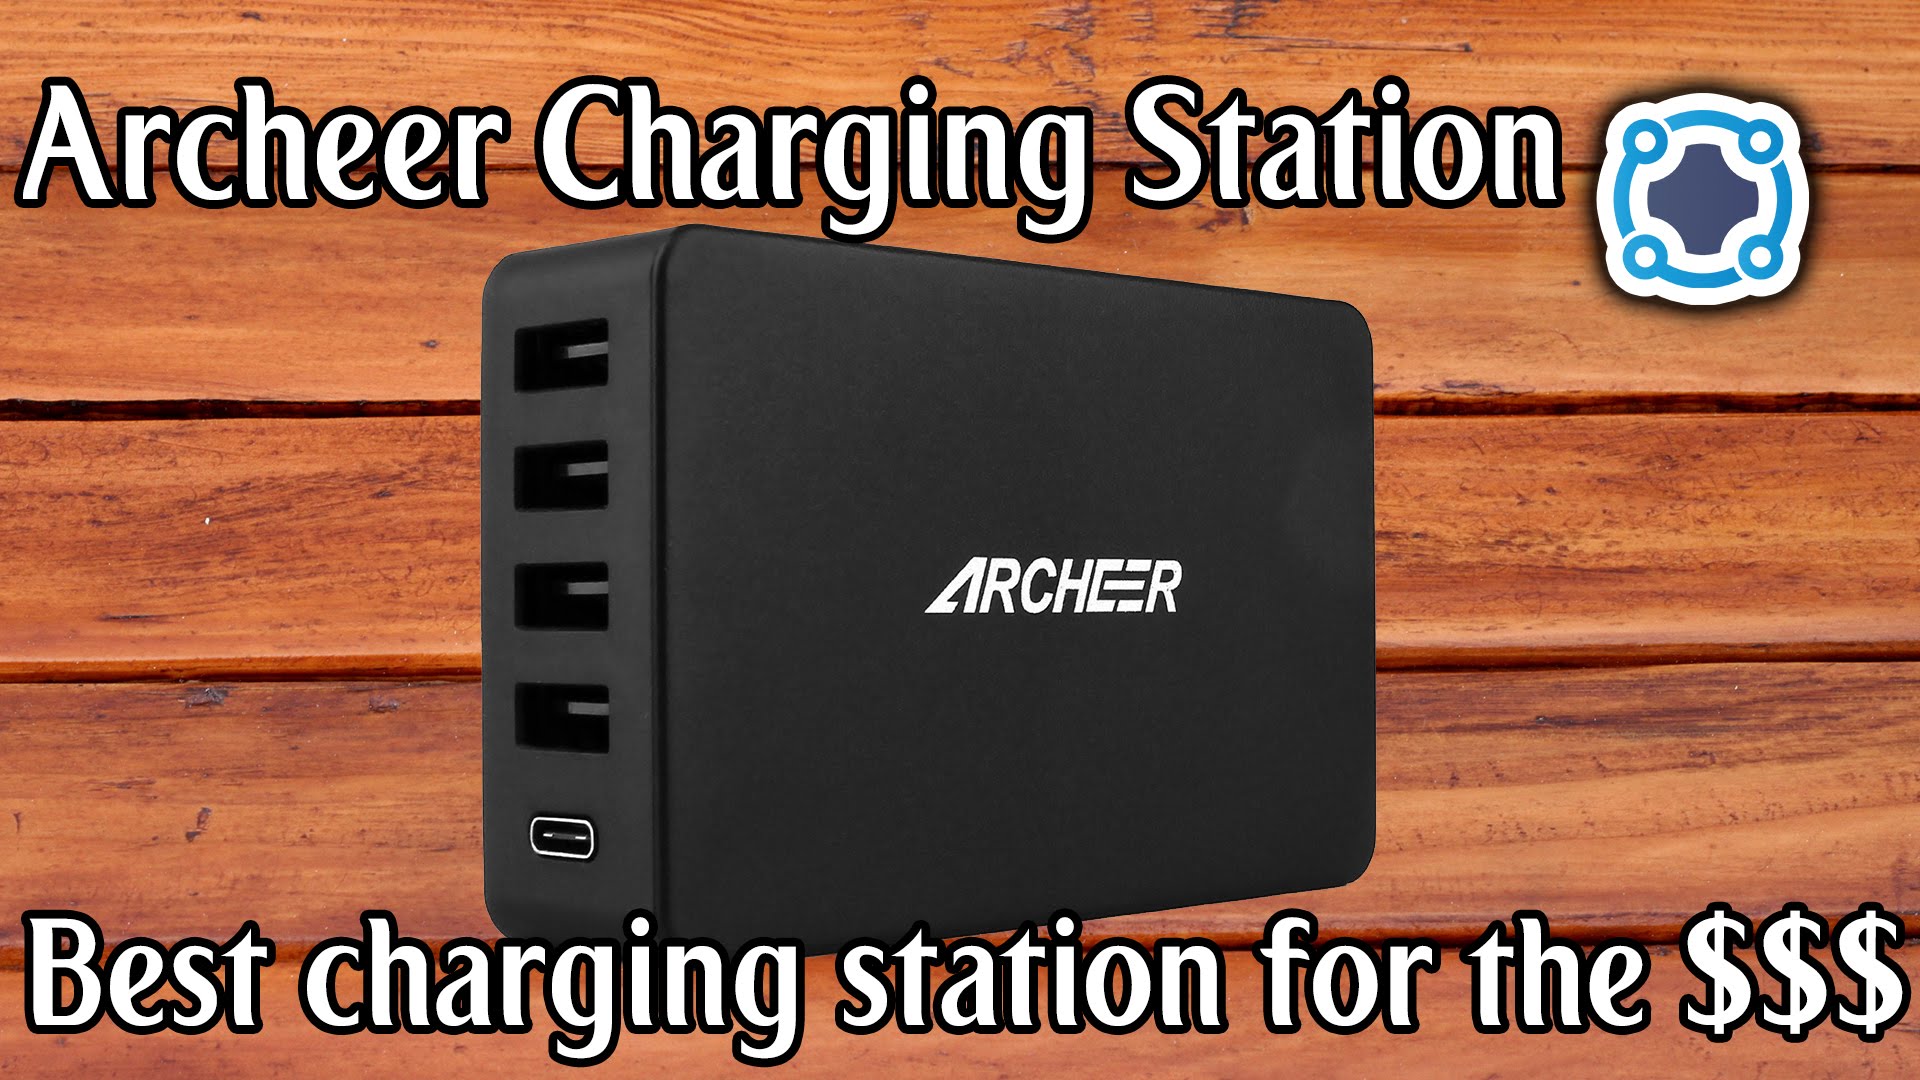 Review: Archeer Quick Charge 3.0 5 Port USB Wall Charger